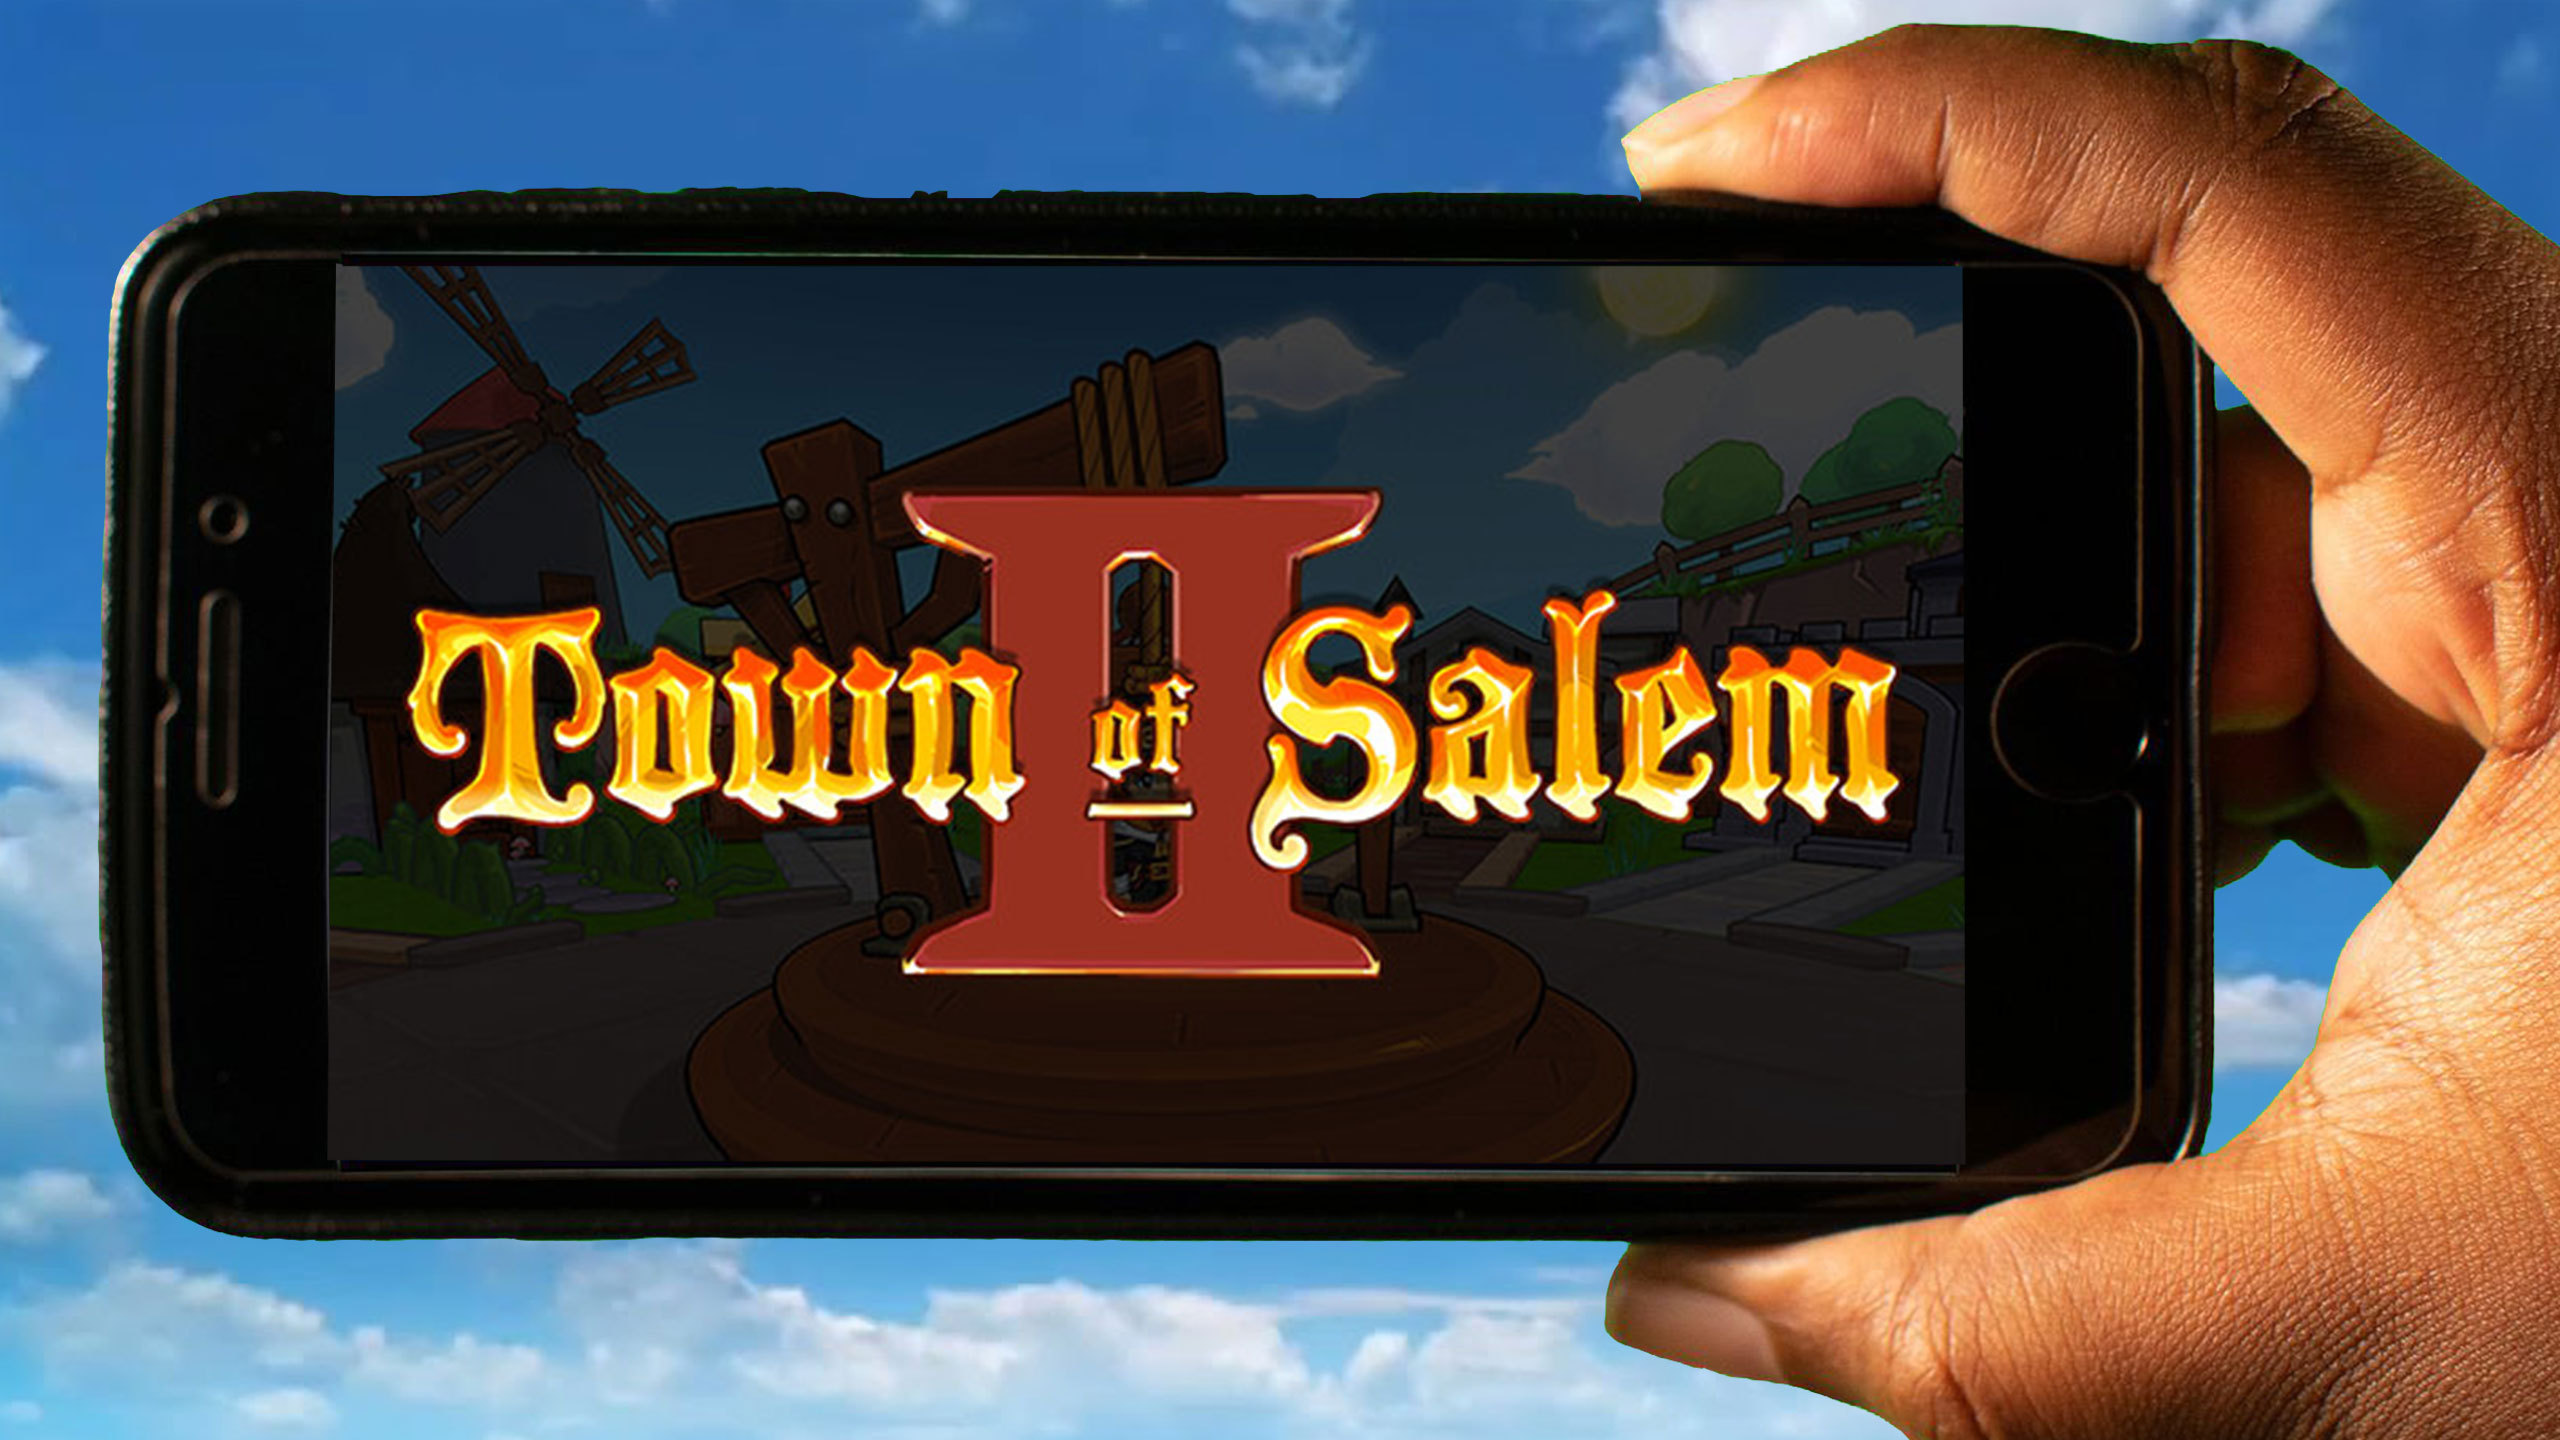 Town of Salem 2 - Front Page of Steam : r/TownofSalemgame